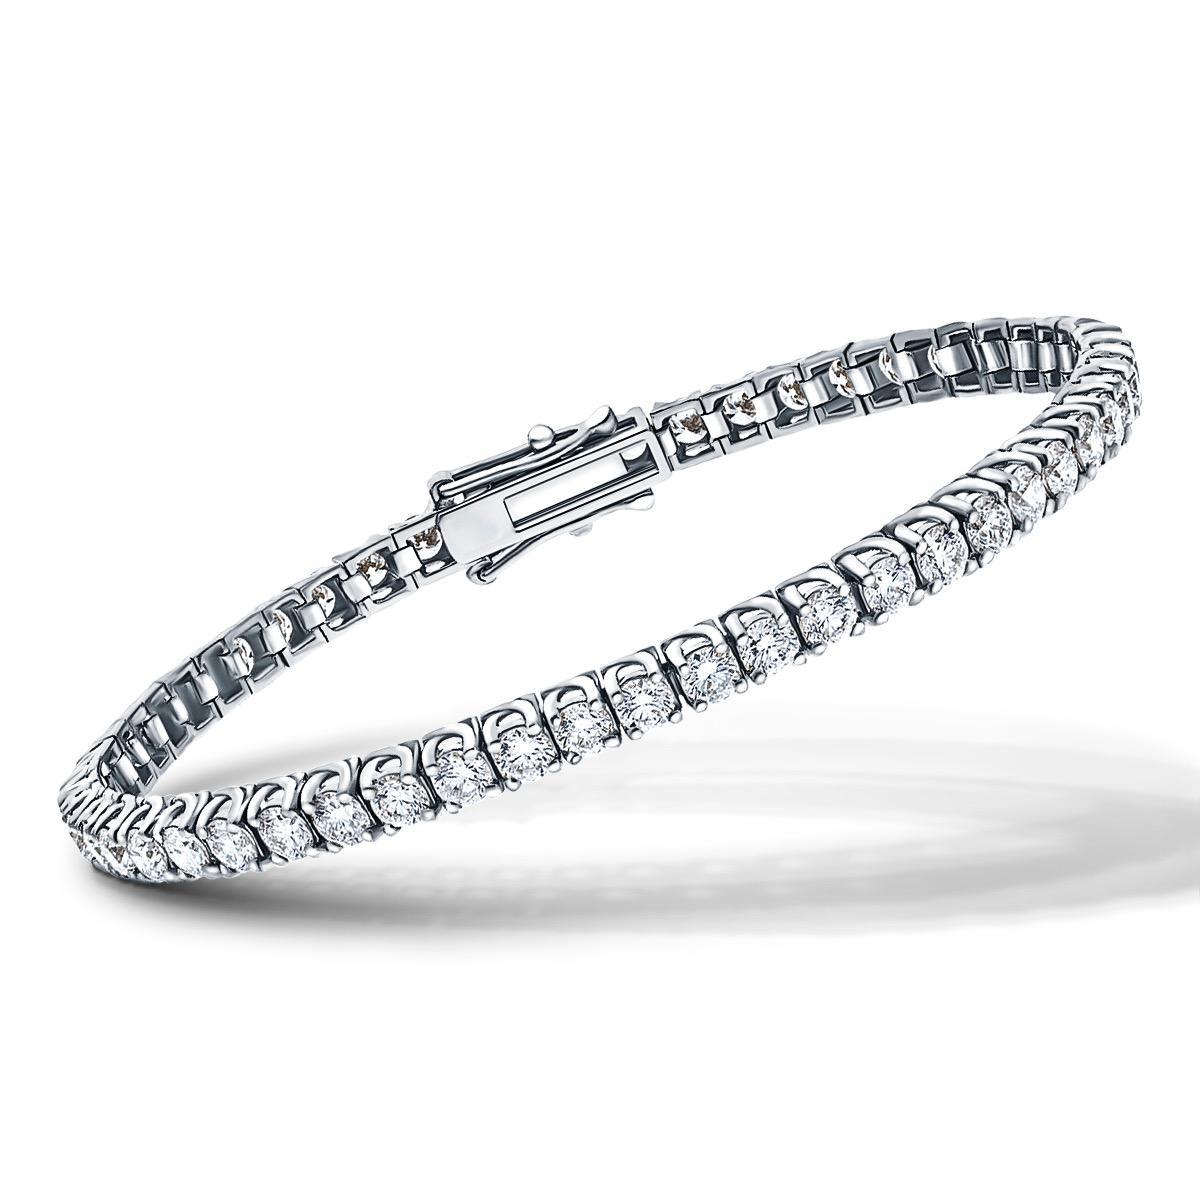 This fantastic 6 Carats Round Brilliant Cut Diamonds White Color G / H Clarity SI1 are set in 18 Karat White Gold for this stunning tennis bracelet. Set in a four claw cross over / tulip design with a security clasp. Other carat sizes available upon